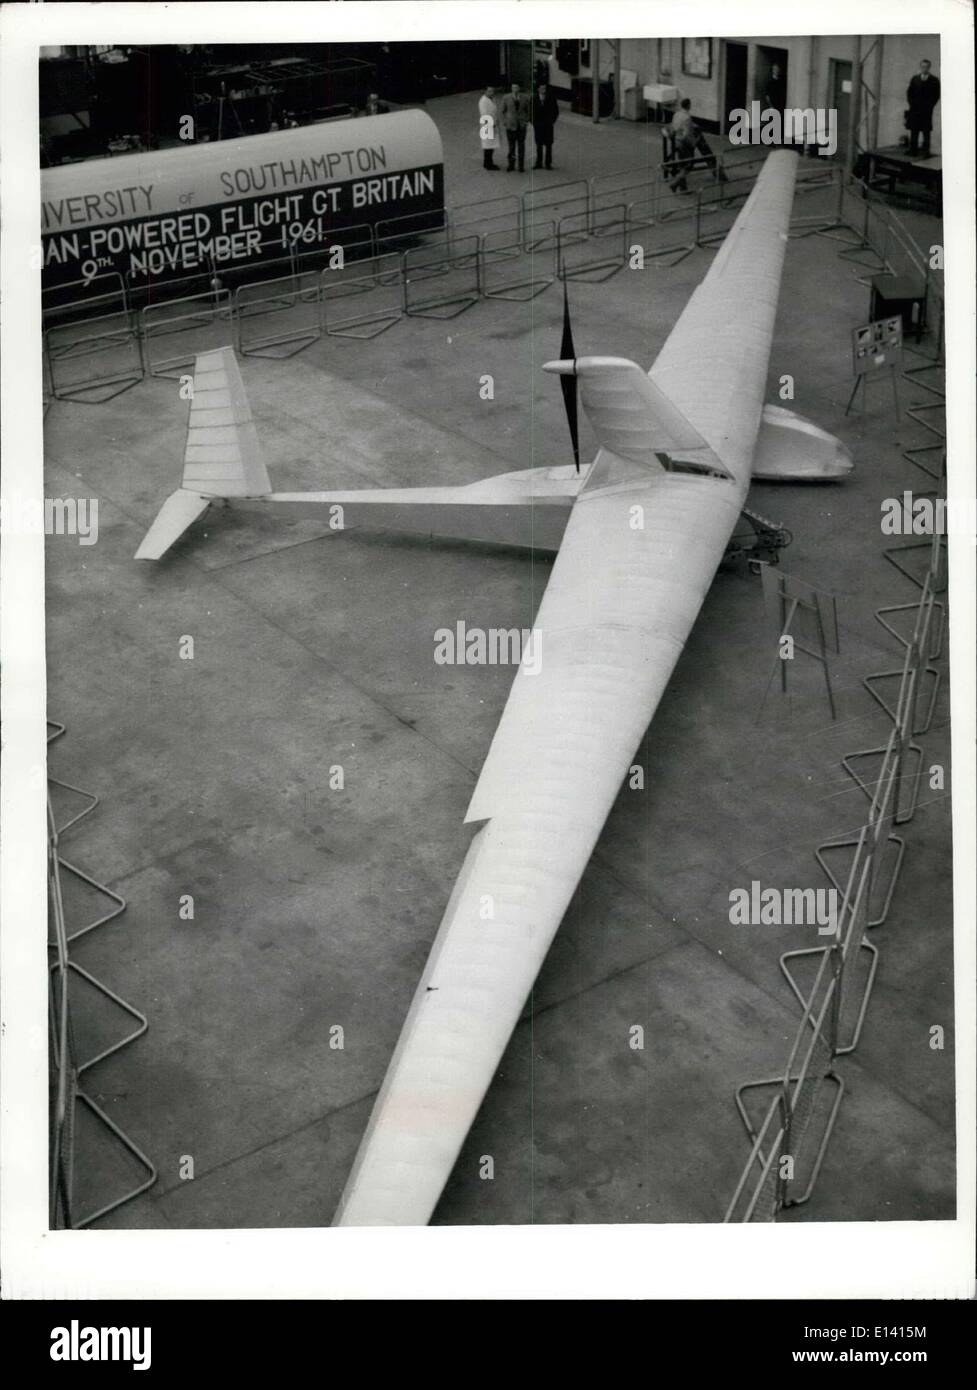 Mar. 31, 2012 - S.U.N.P.A..C. a highly successful project which achieved the distinction of making the first man-powered flight Stock Photo